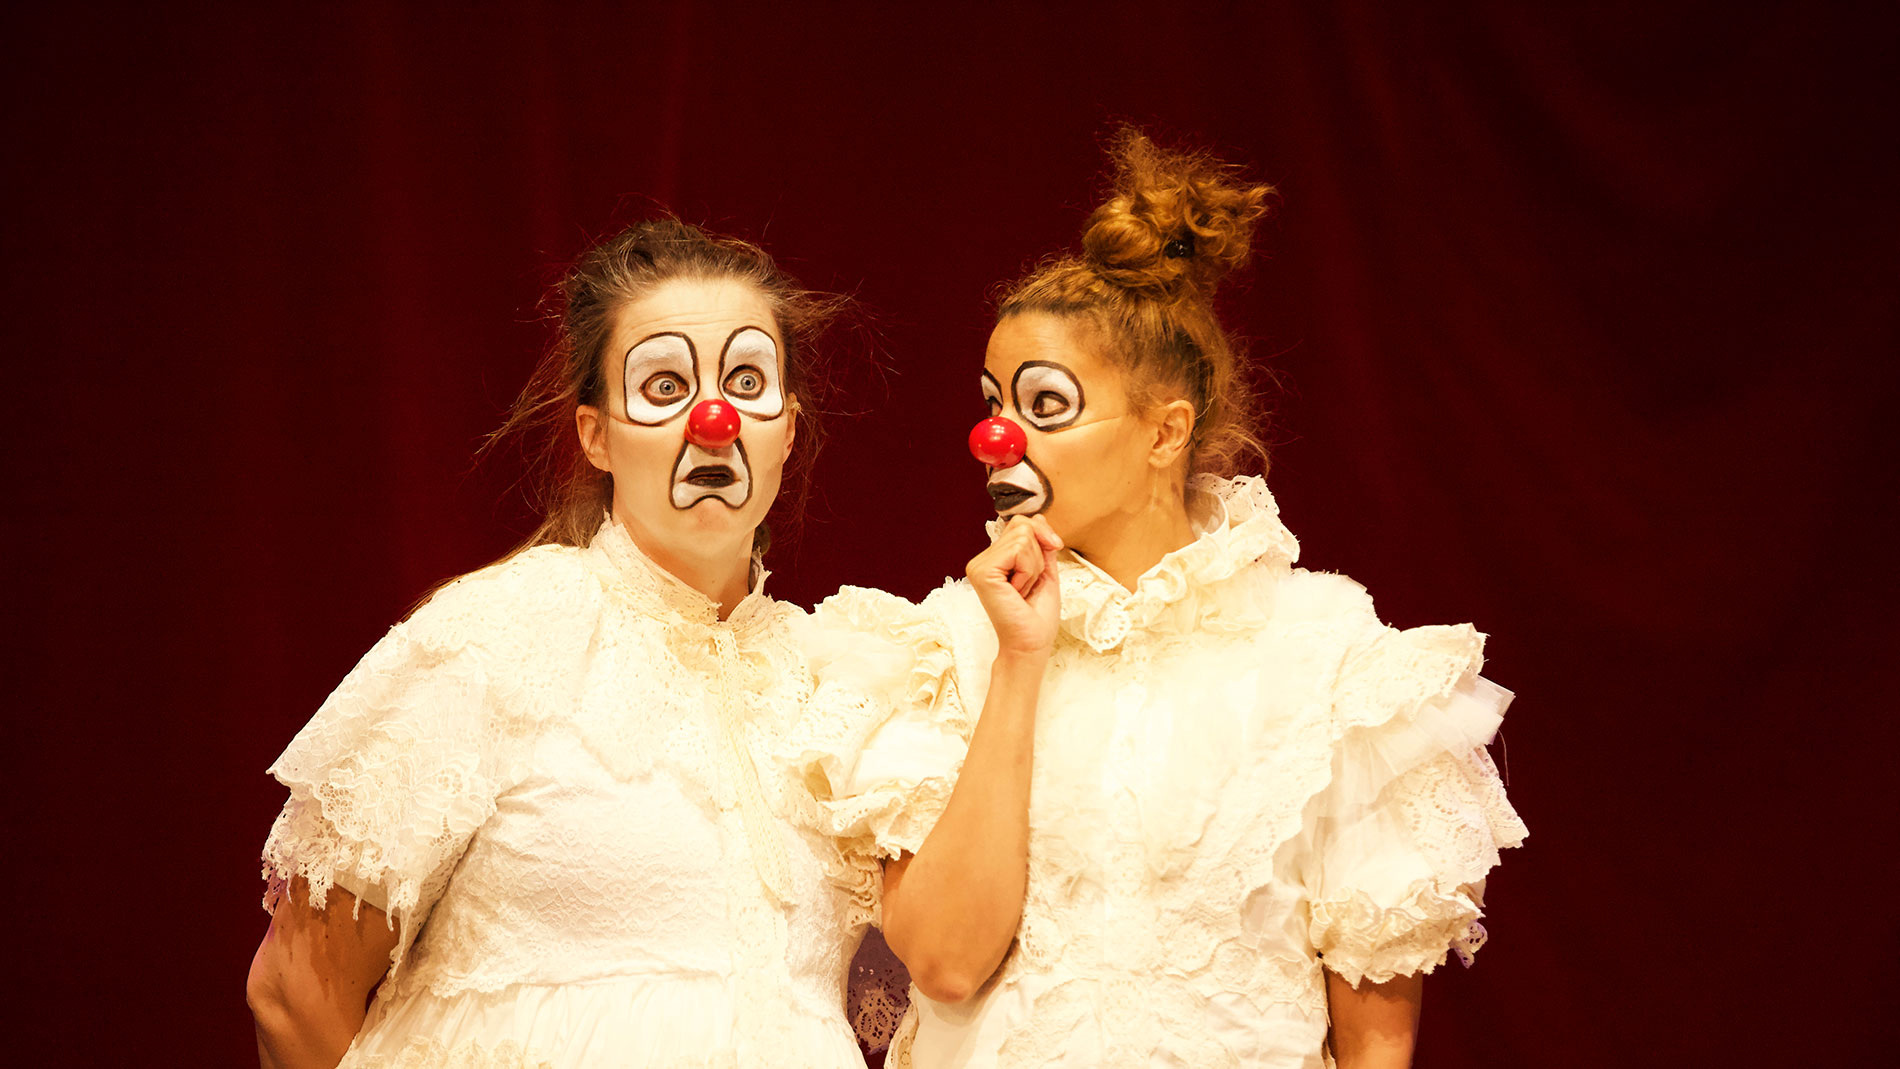 Two clowns wearing white dresses.